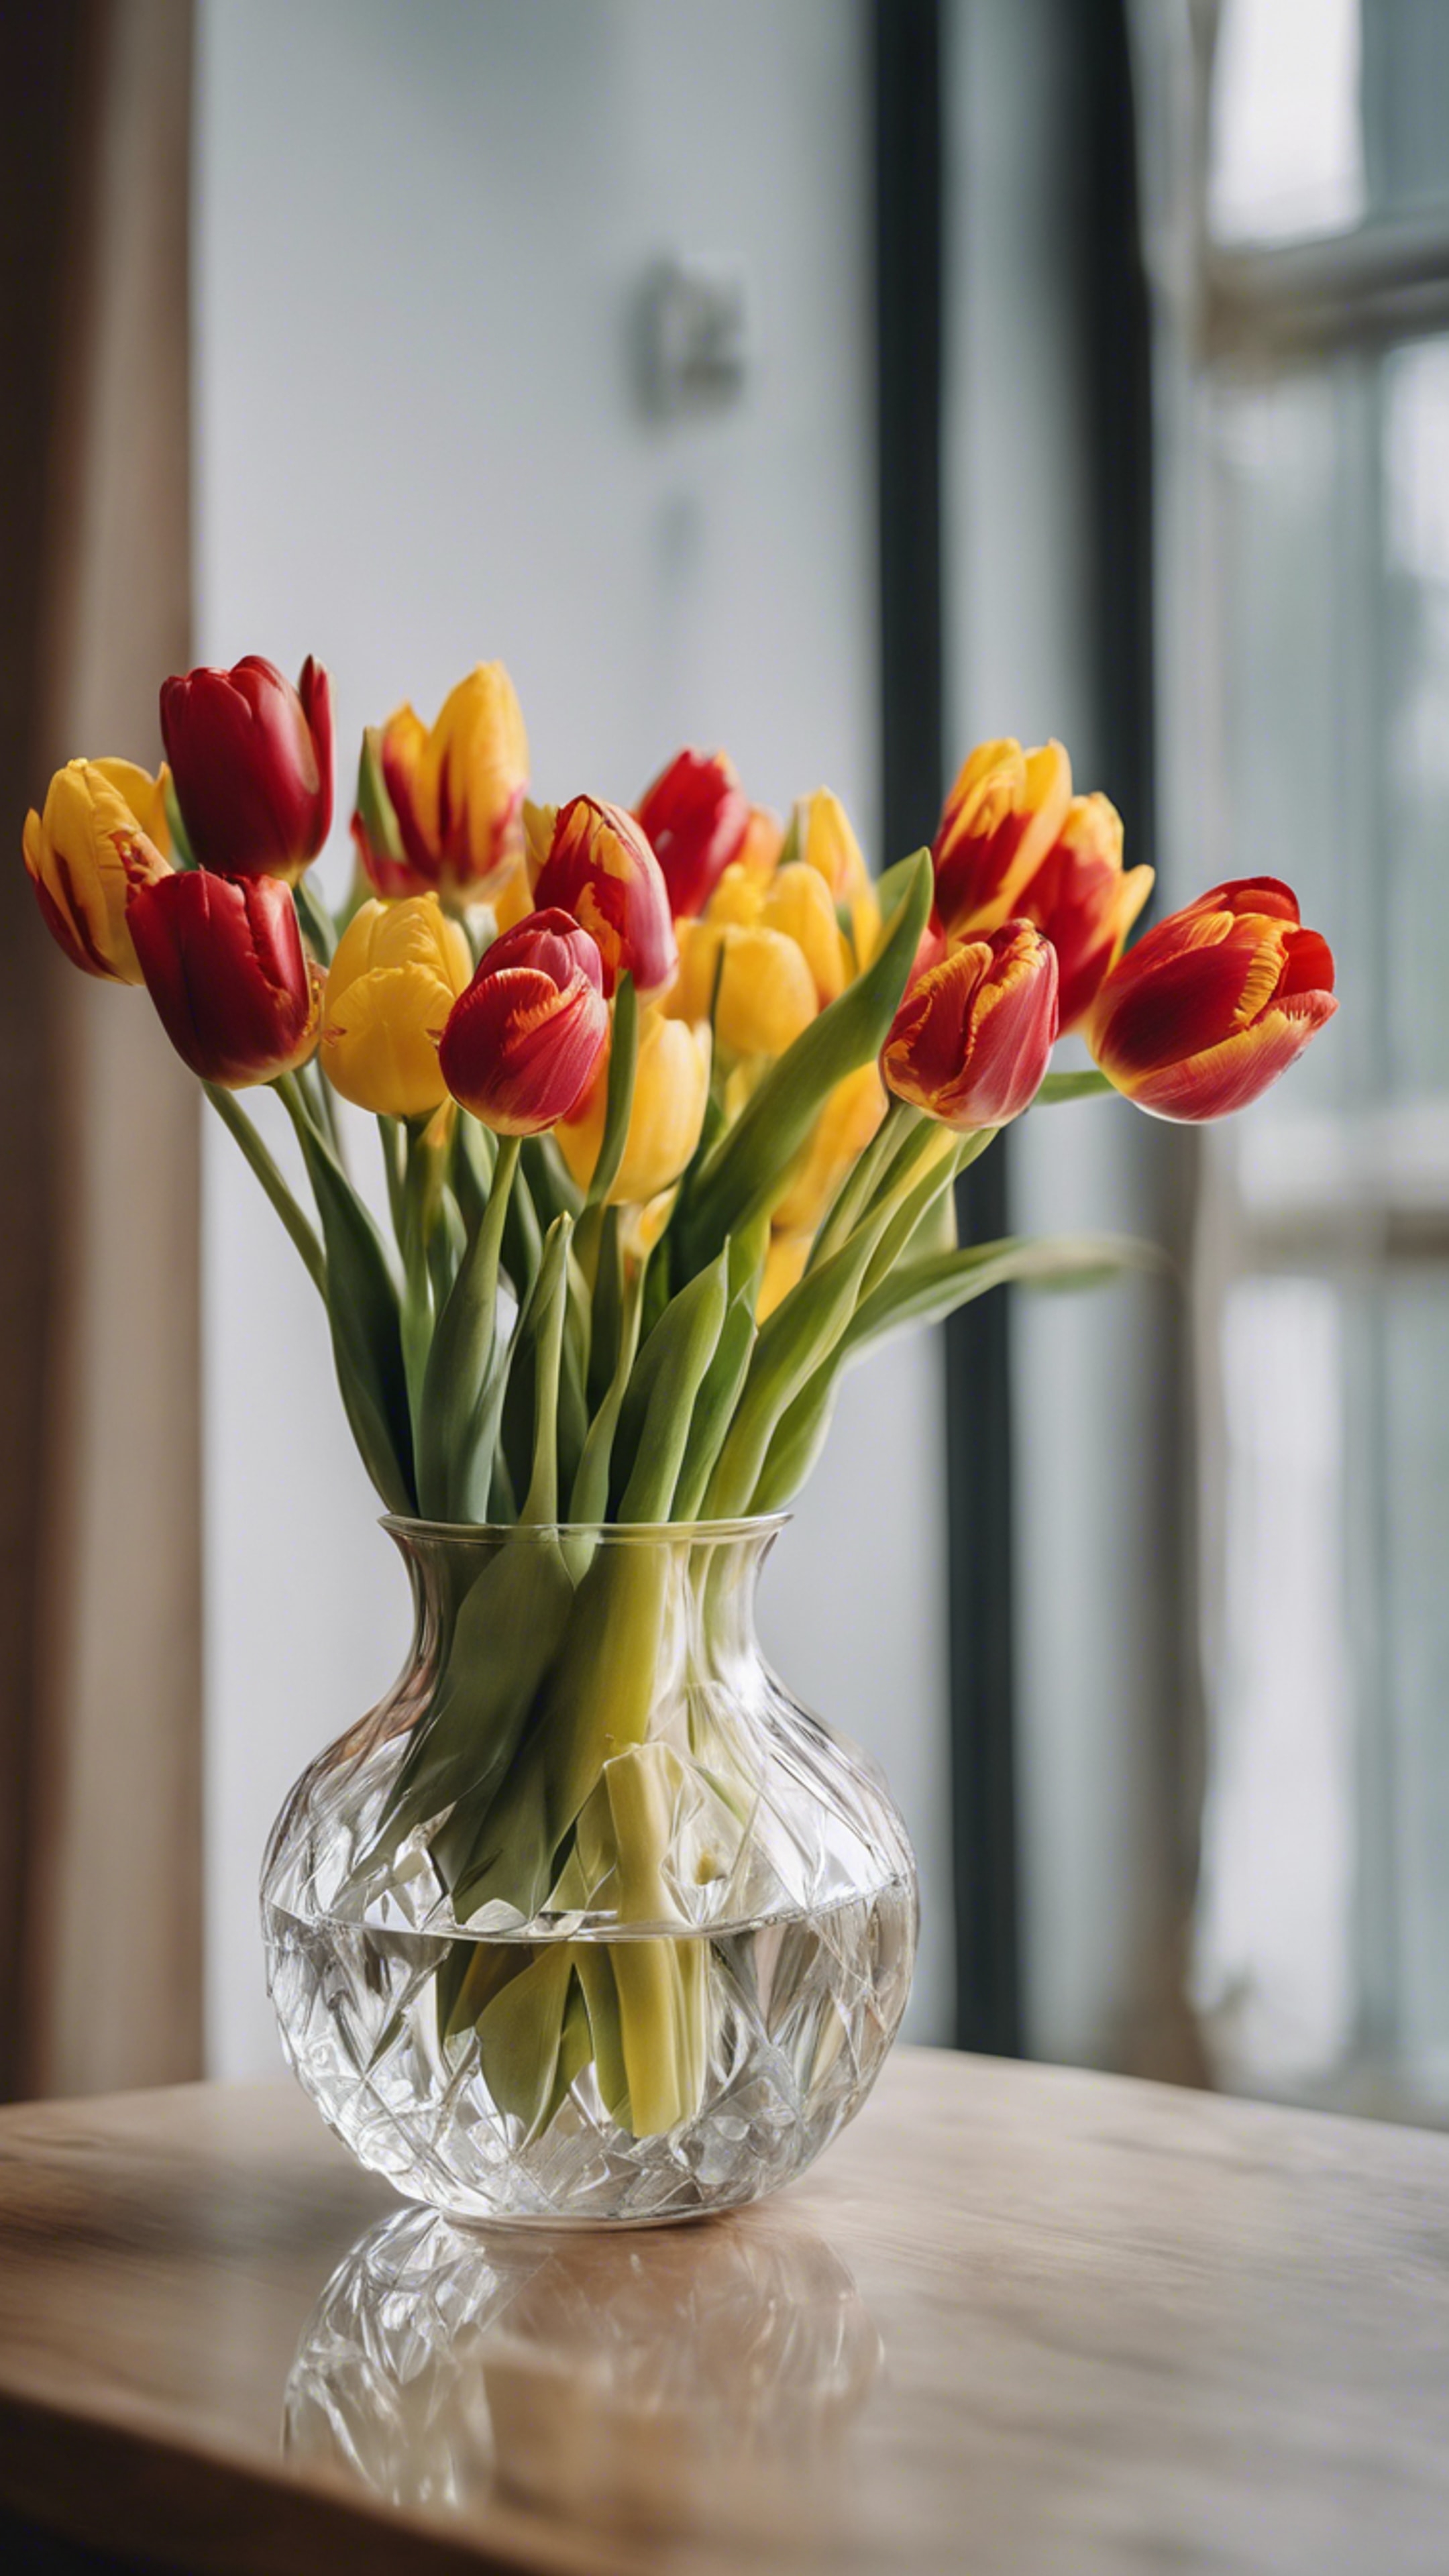 A bunch of fresh red and yellow tulips resting in a crystal clear vase. Tapet[770eab0b3cc545c1af9b]